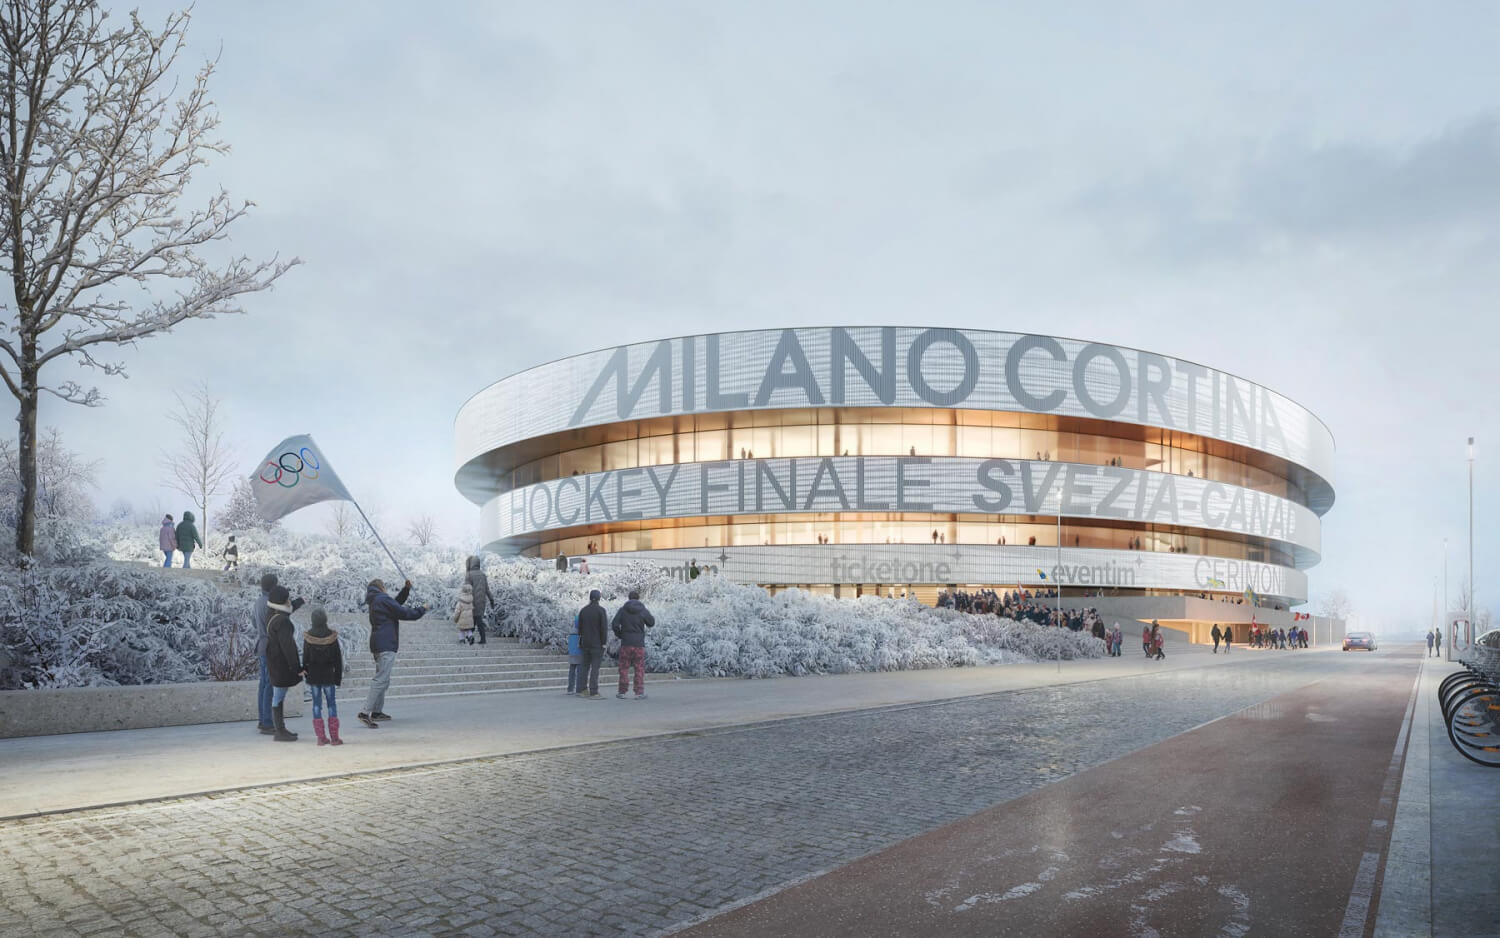 rendering of a circular arena pictured in snowy conditions